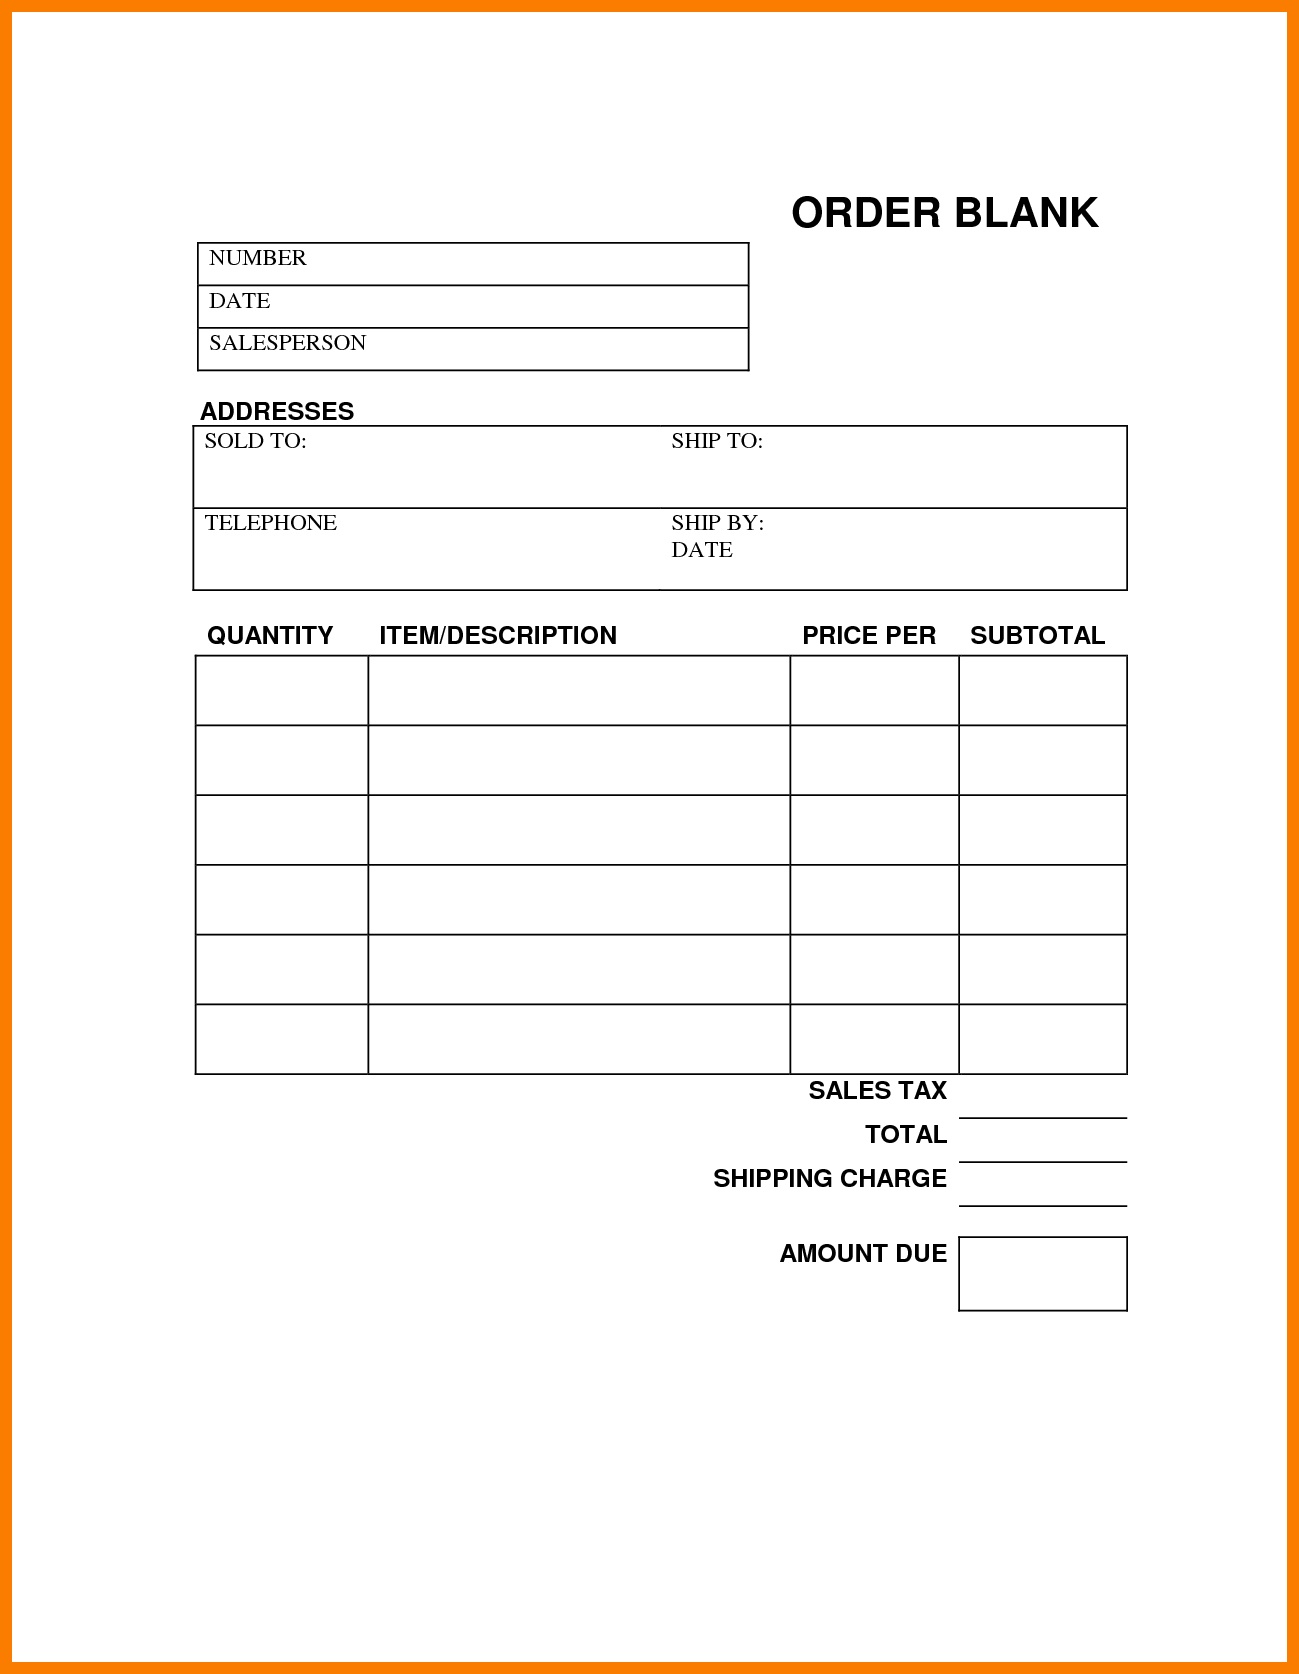 Printable Order Form Template | 2018 Yearly Calendar - Free Printable Scentsy Order Forms